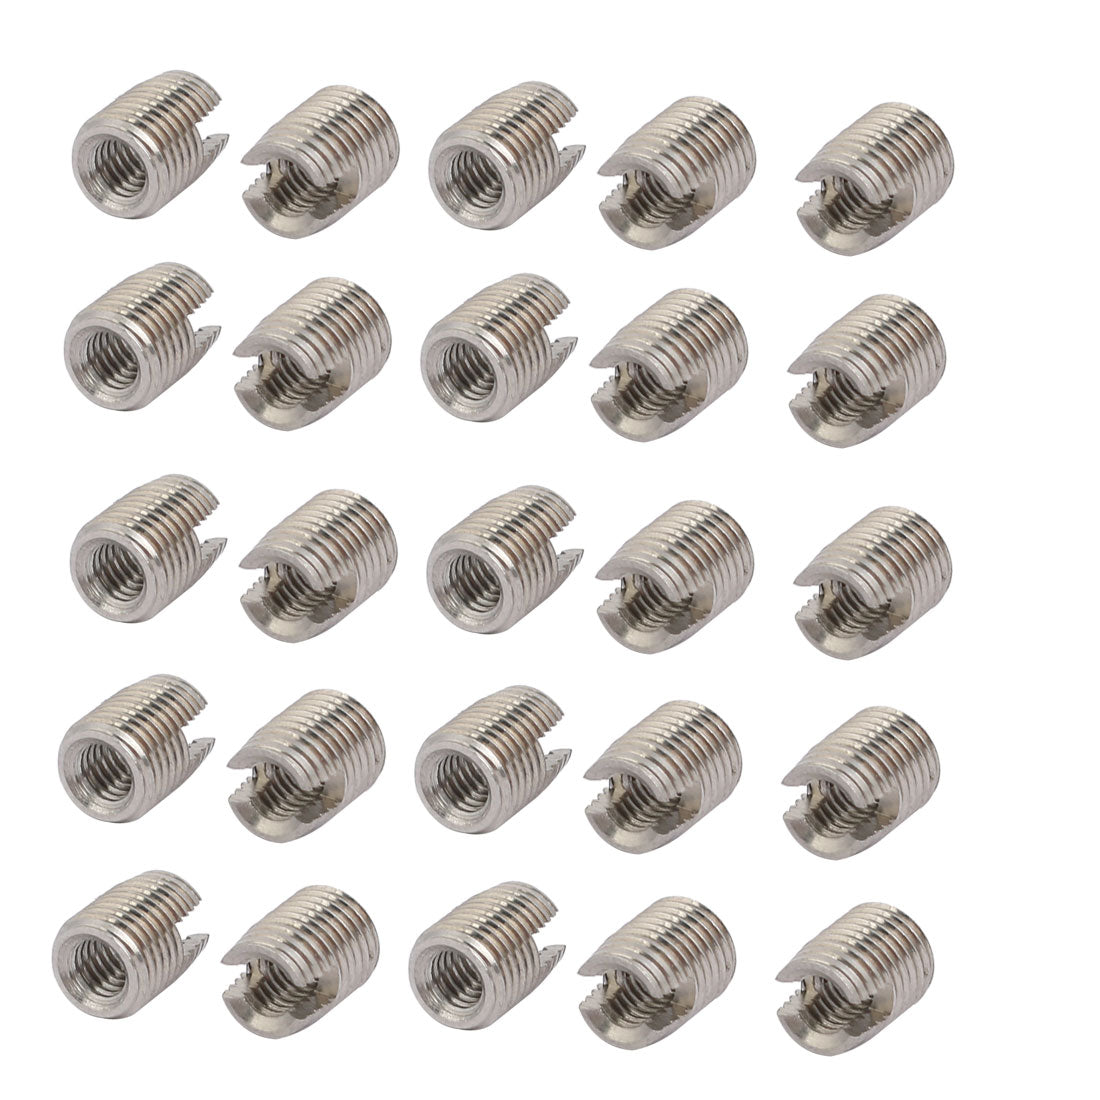 uxcell Uxcell M4x8mm 304 Stainless Steel Self Tapping Slotted Thread Insert 20pcs